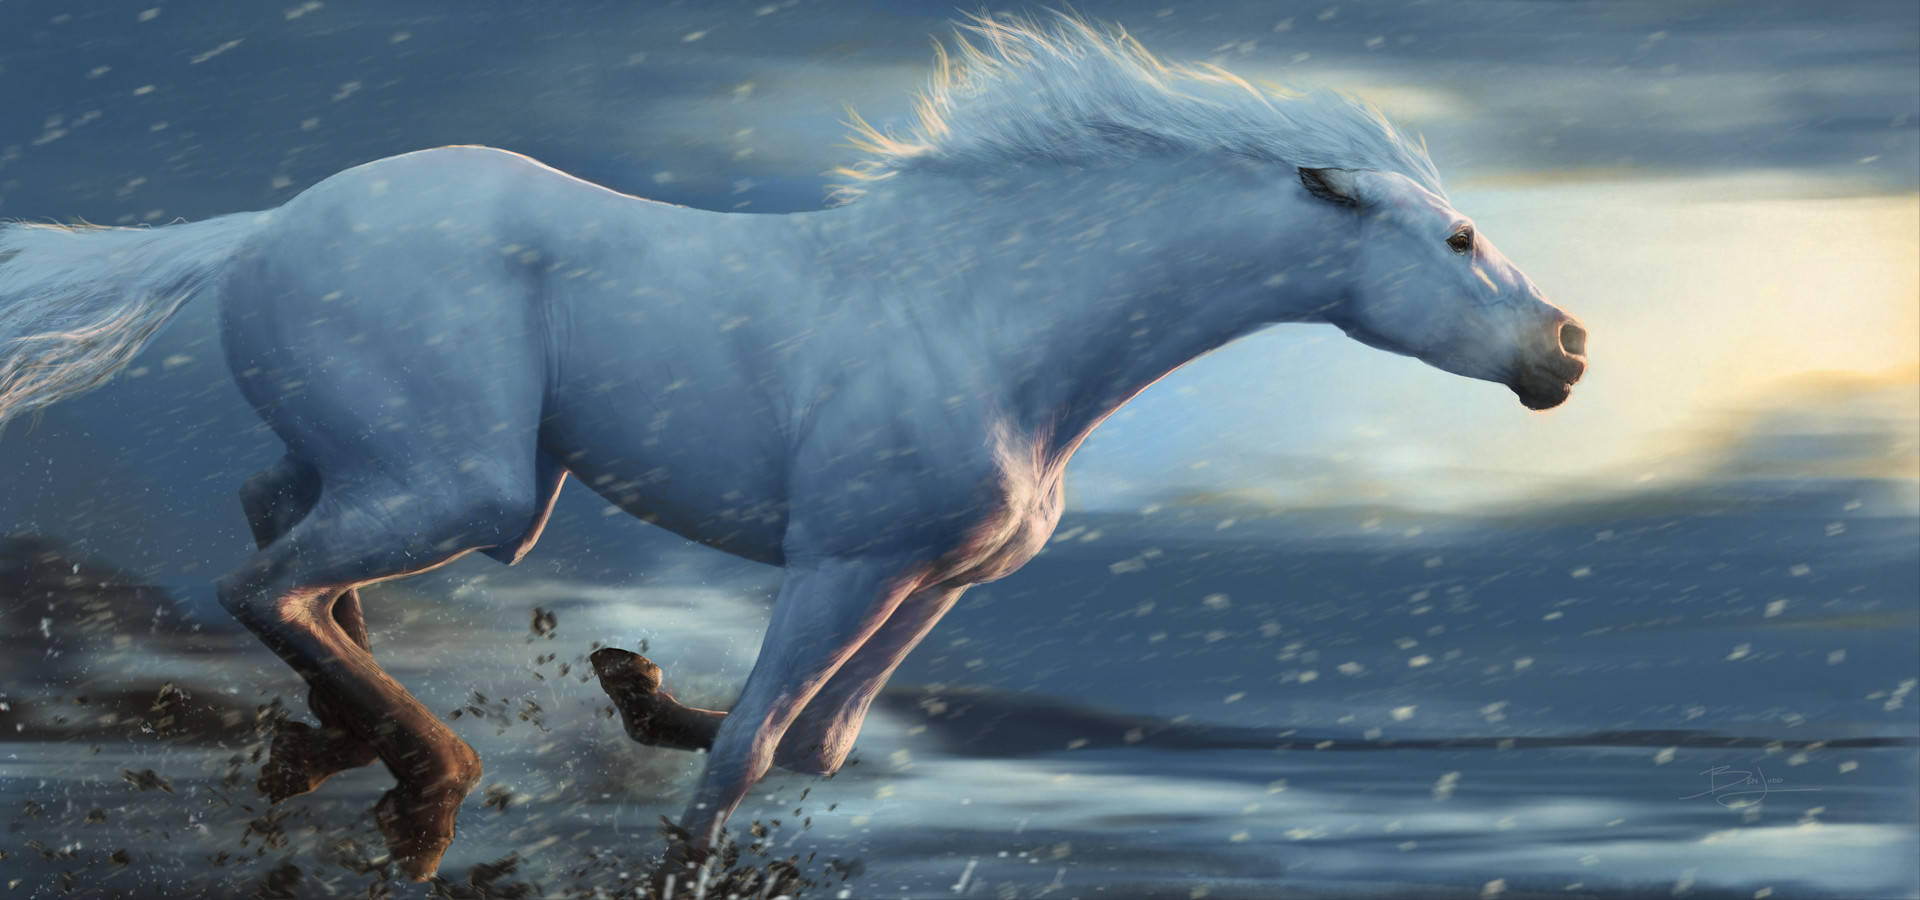 Free Horse Wallpaper Downloads, [400+] Horse Wallpapers for FREE |  